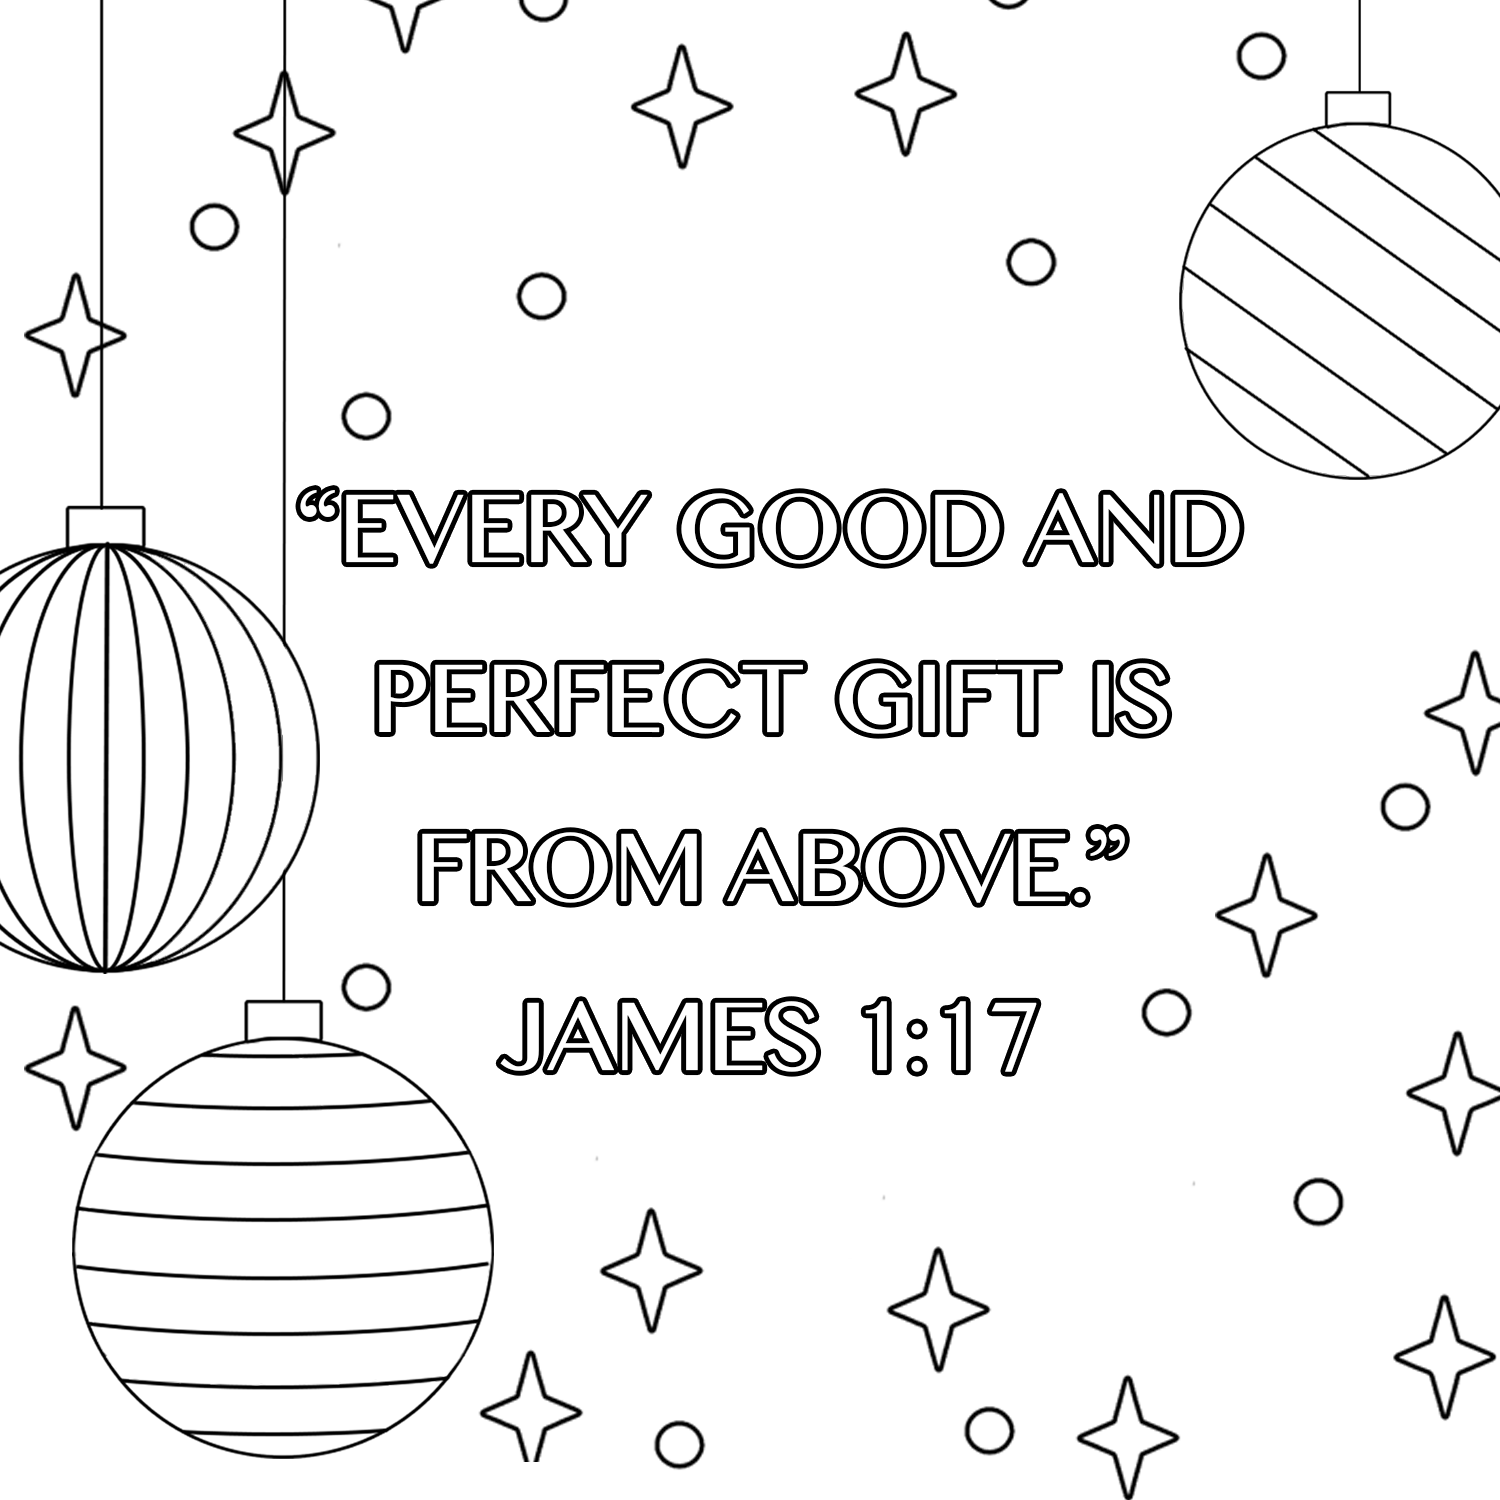 Christmas Coloring Pages With Bible Verse - James 1:17 - Underbart skapad